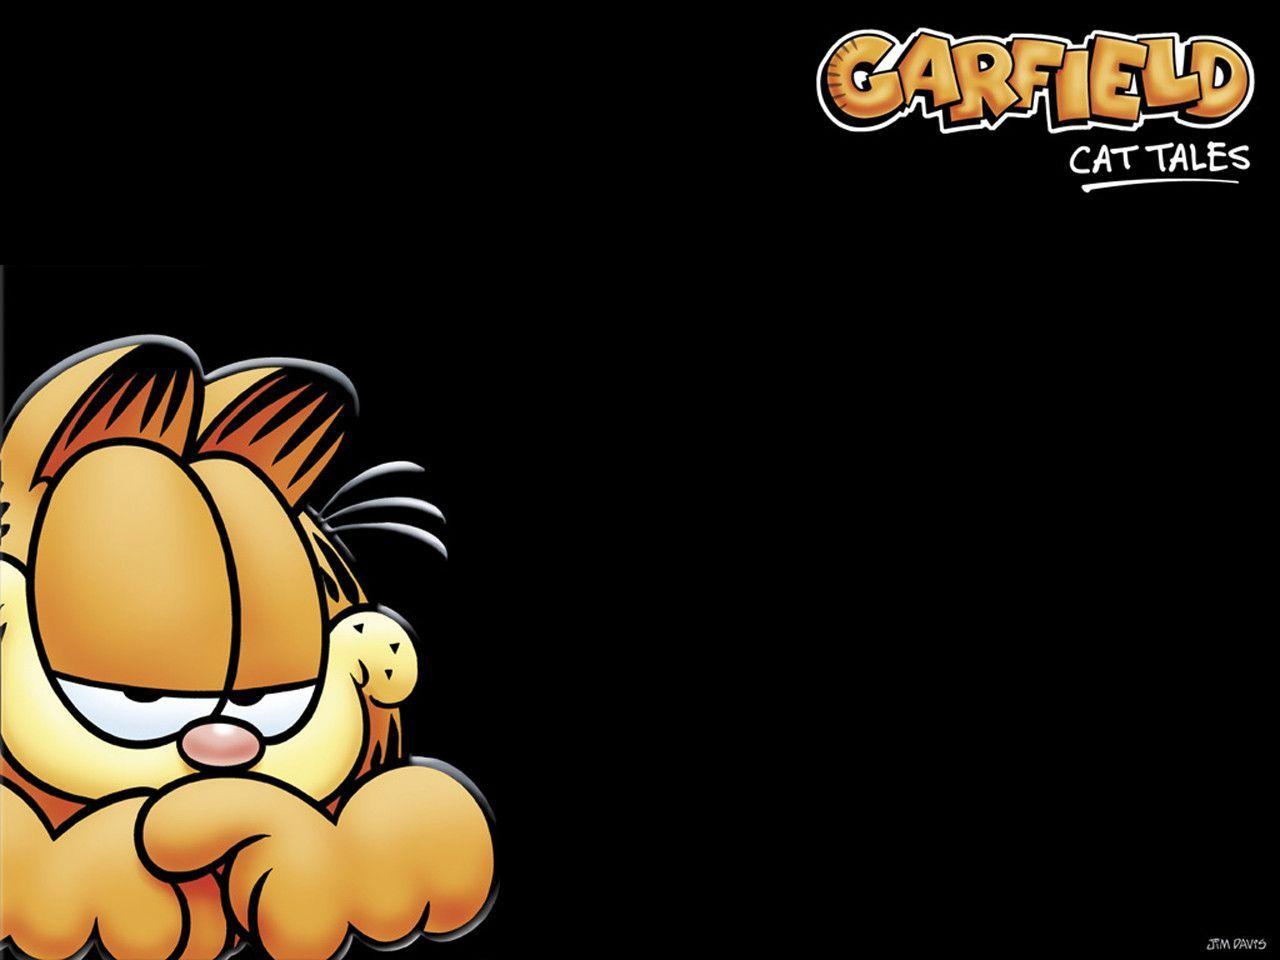 Download this awesome wallpaper. Garfield